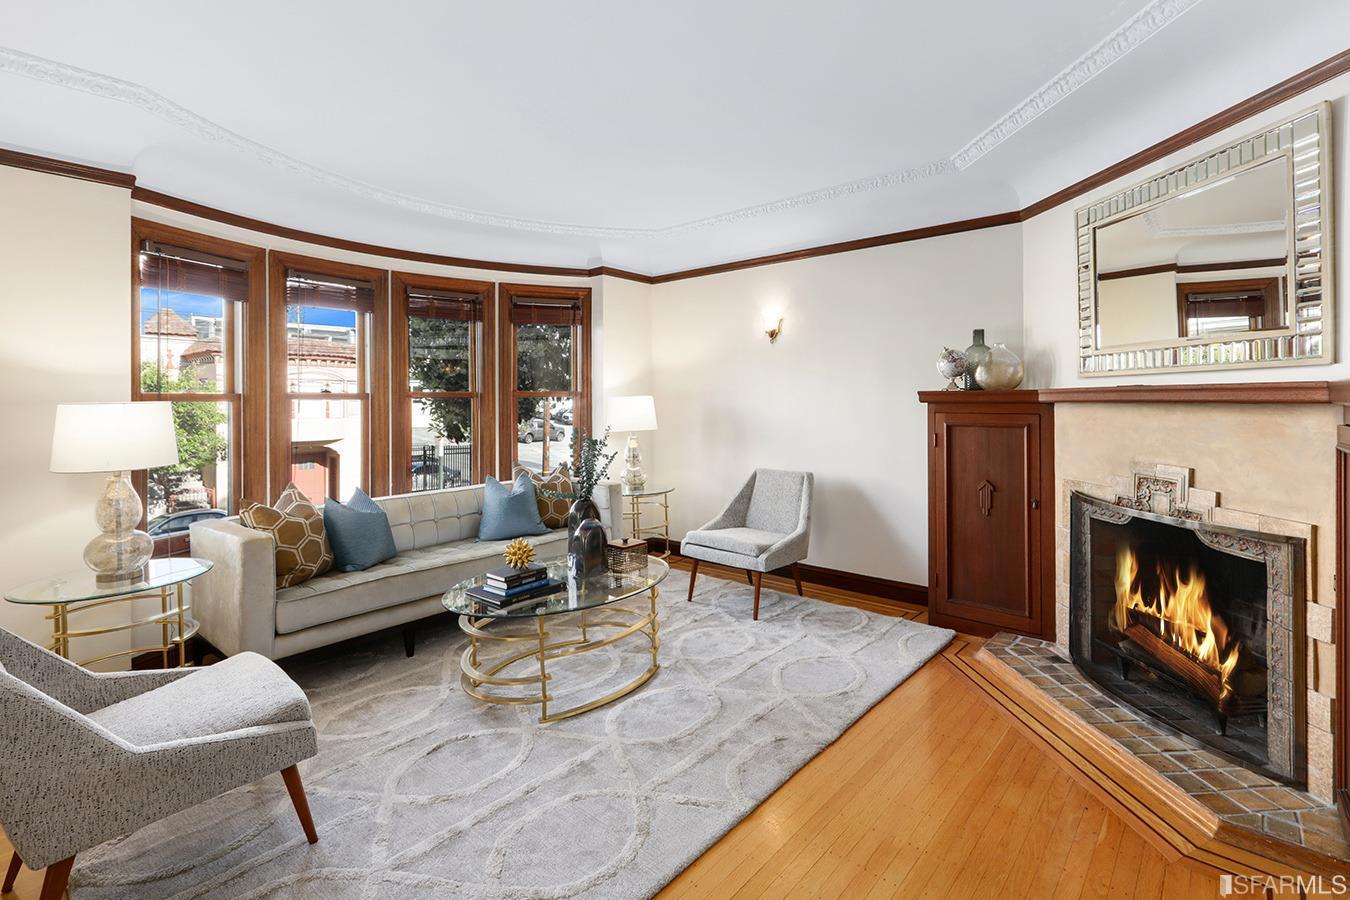 The home boasts an expansive living room  with beautifully preserved period details including elegant paneled doors, inlaid hardwood floors and a wood-burning fireplace.